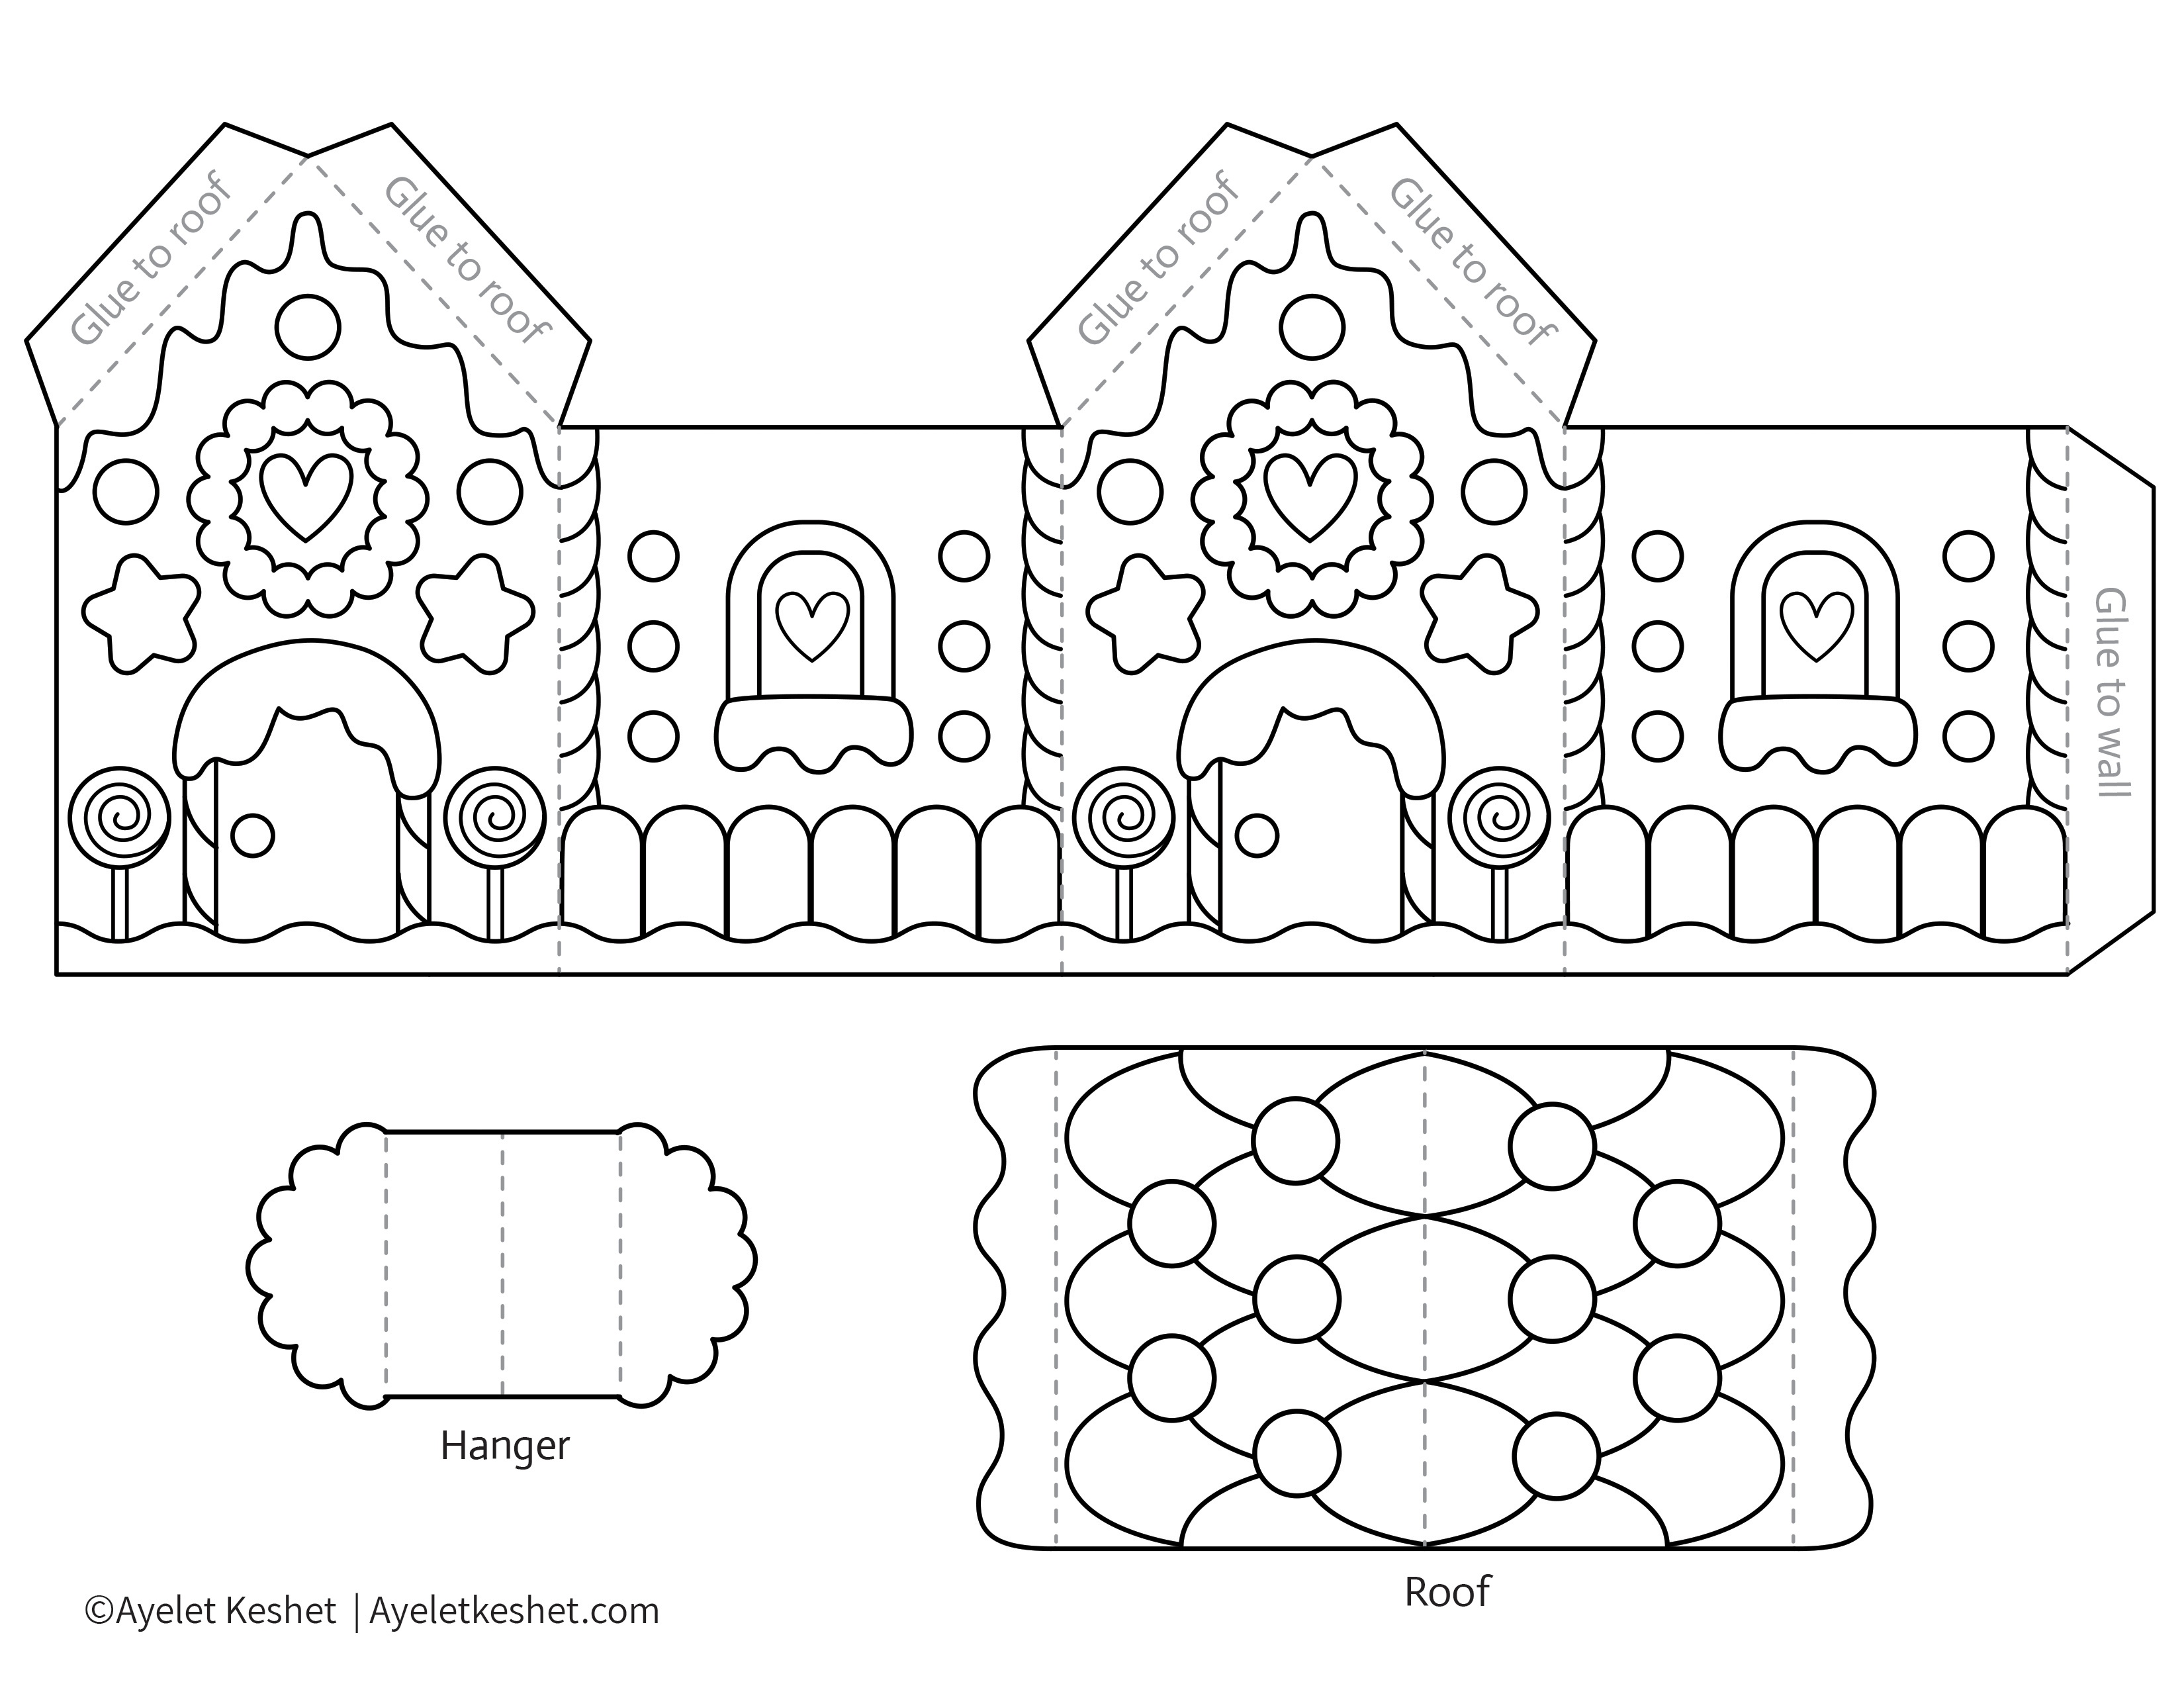 Printable Gingerbread House Template To Color - Ayelet Keshet - Gingerbread Template Free Printable